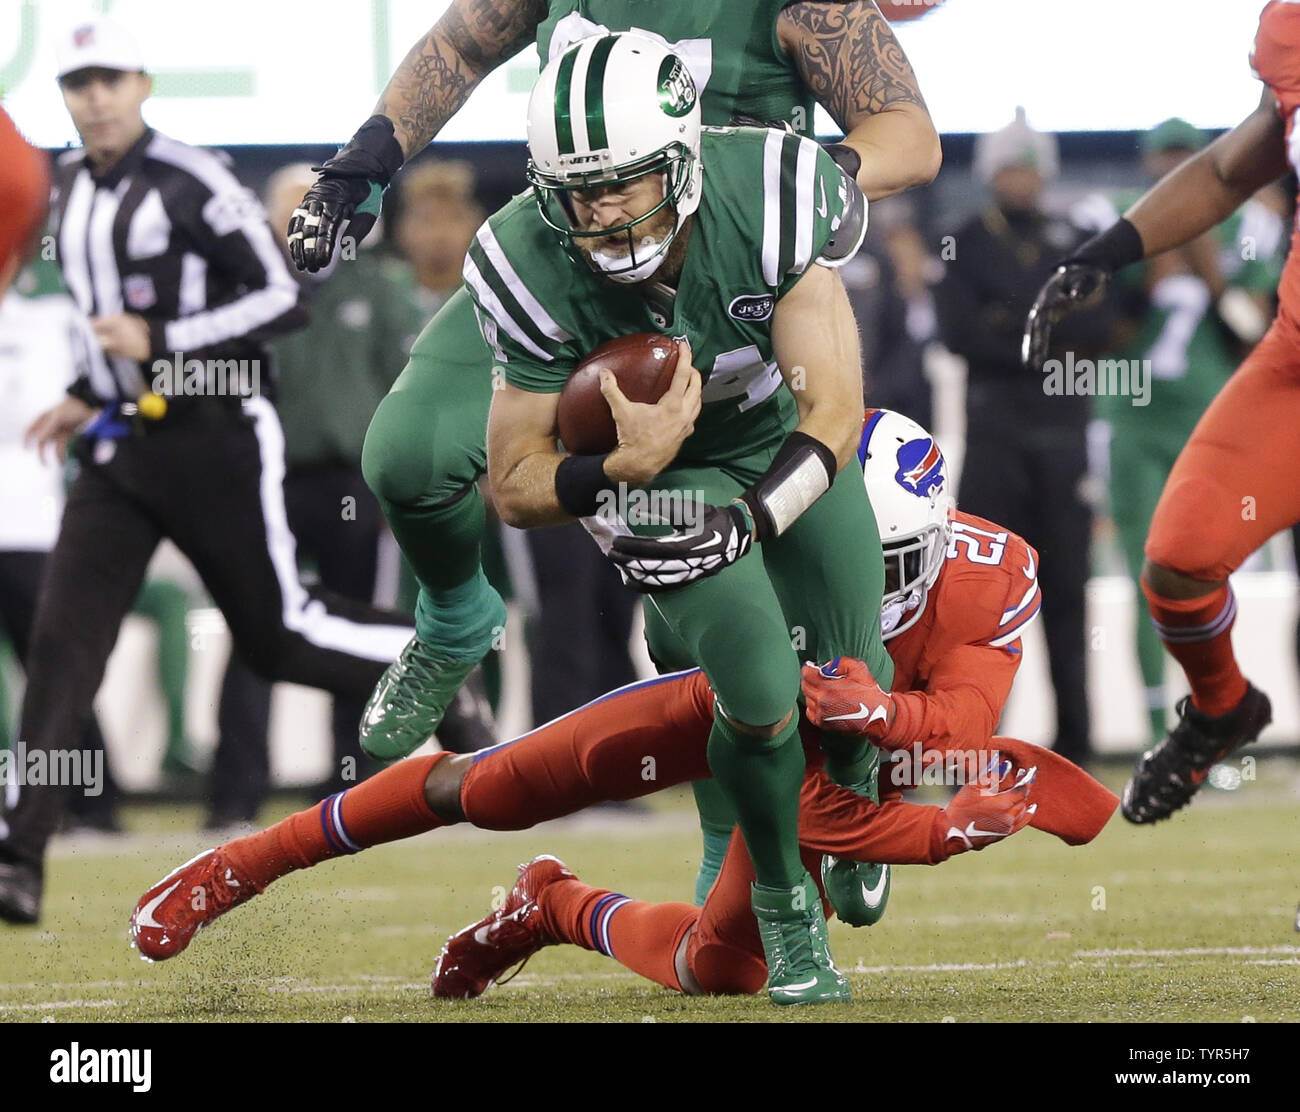 Buffalo Bills Leodis McKelvin tackles New York Jets quarterback Ryan Fitzpatrick in the second half at MetLife Stadium in East Rutherford, New Jersey on November 12, 2015.  The Bills defeated the Jets 22-17.  Photo by John Angelillo/UPI Stock Photo